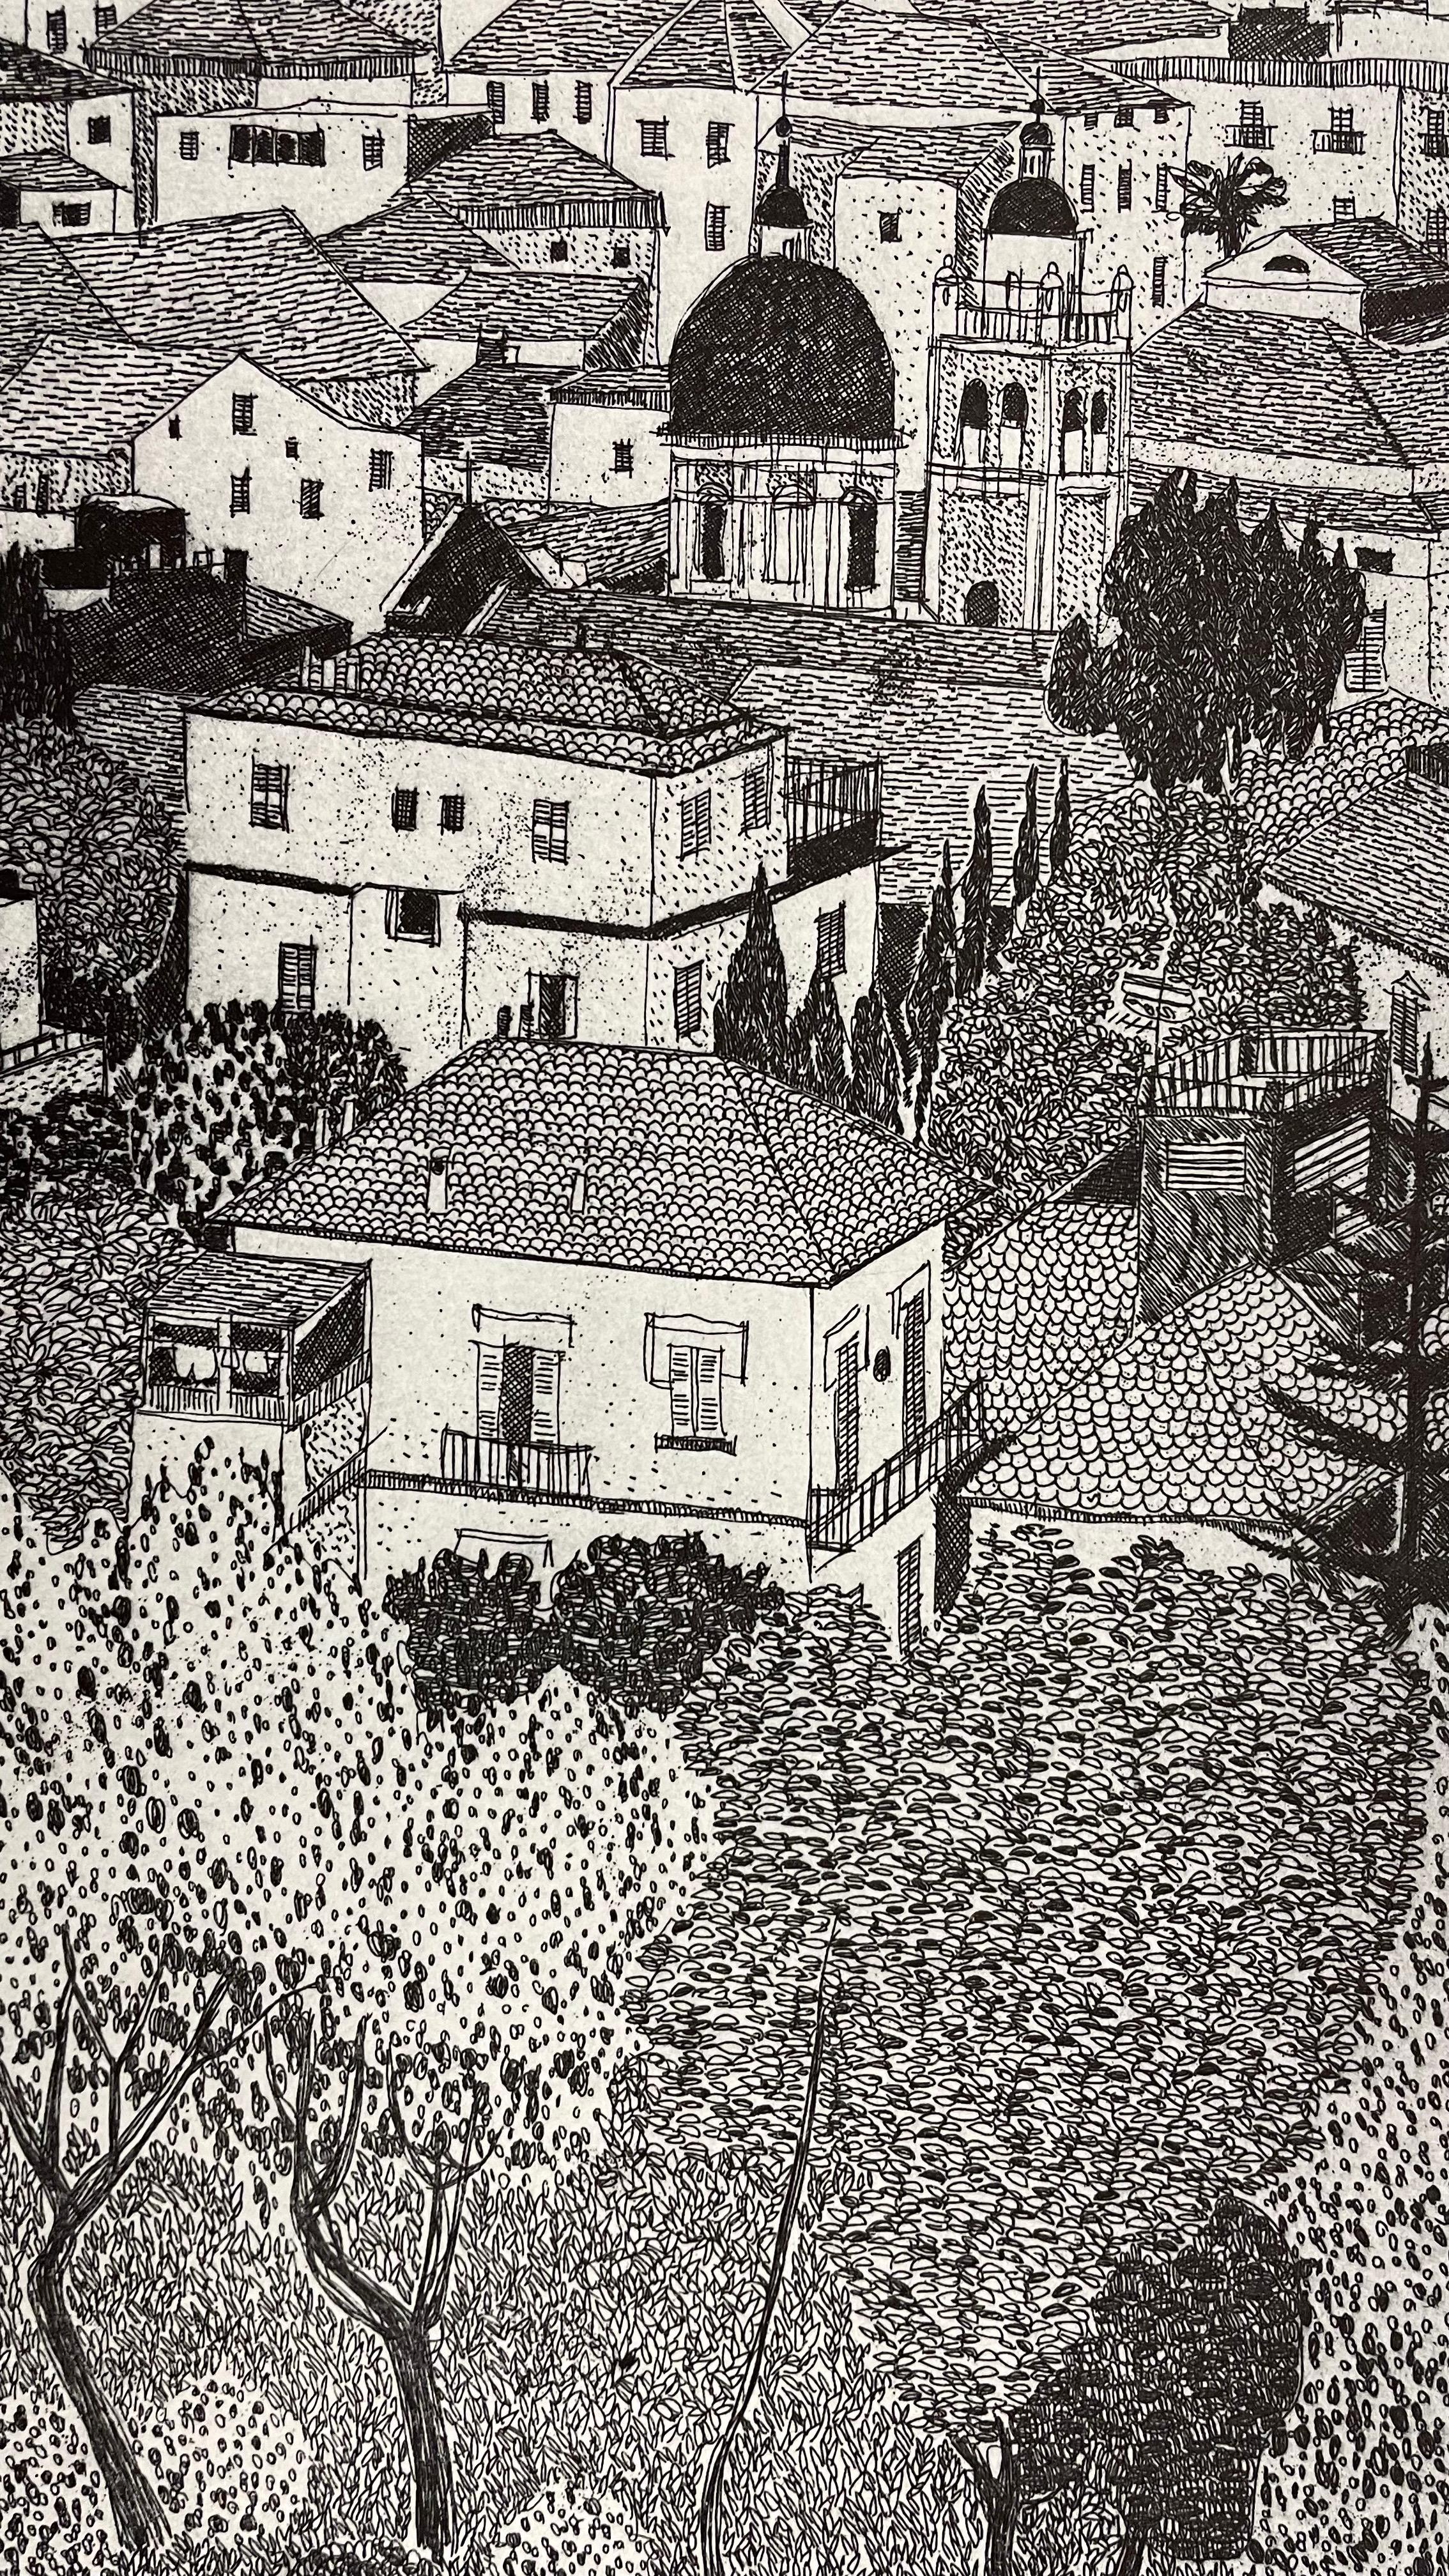 Il torrione
Ref. 397

Original etching, signed and numbered. Limited edition of 90.

Federica Galli was one of Italy's leading contemporary etchers. 
She achieved this fame because she was able to interpret views, as Milan and Venice, landscapes and